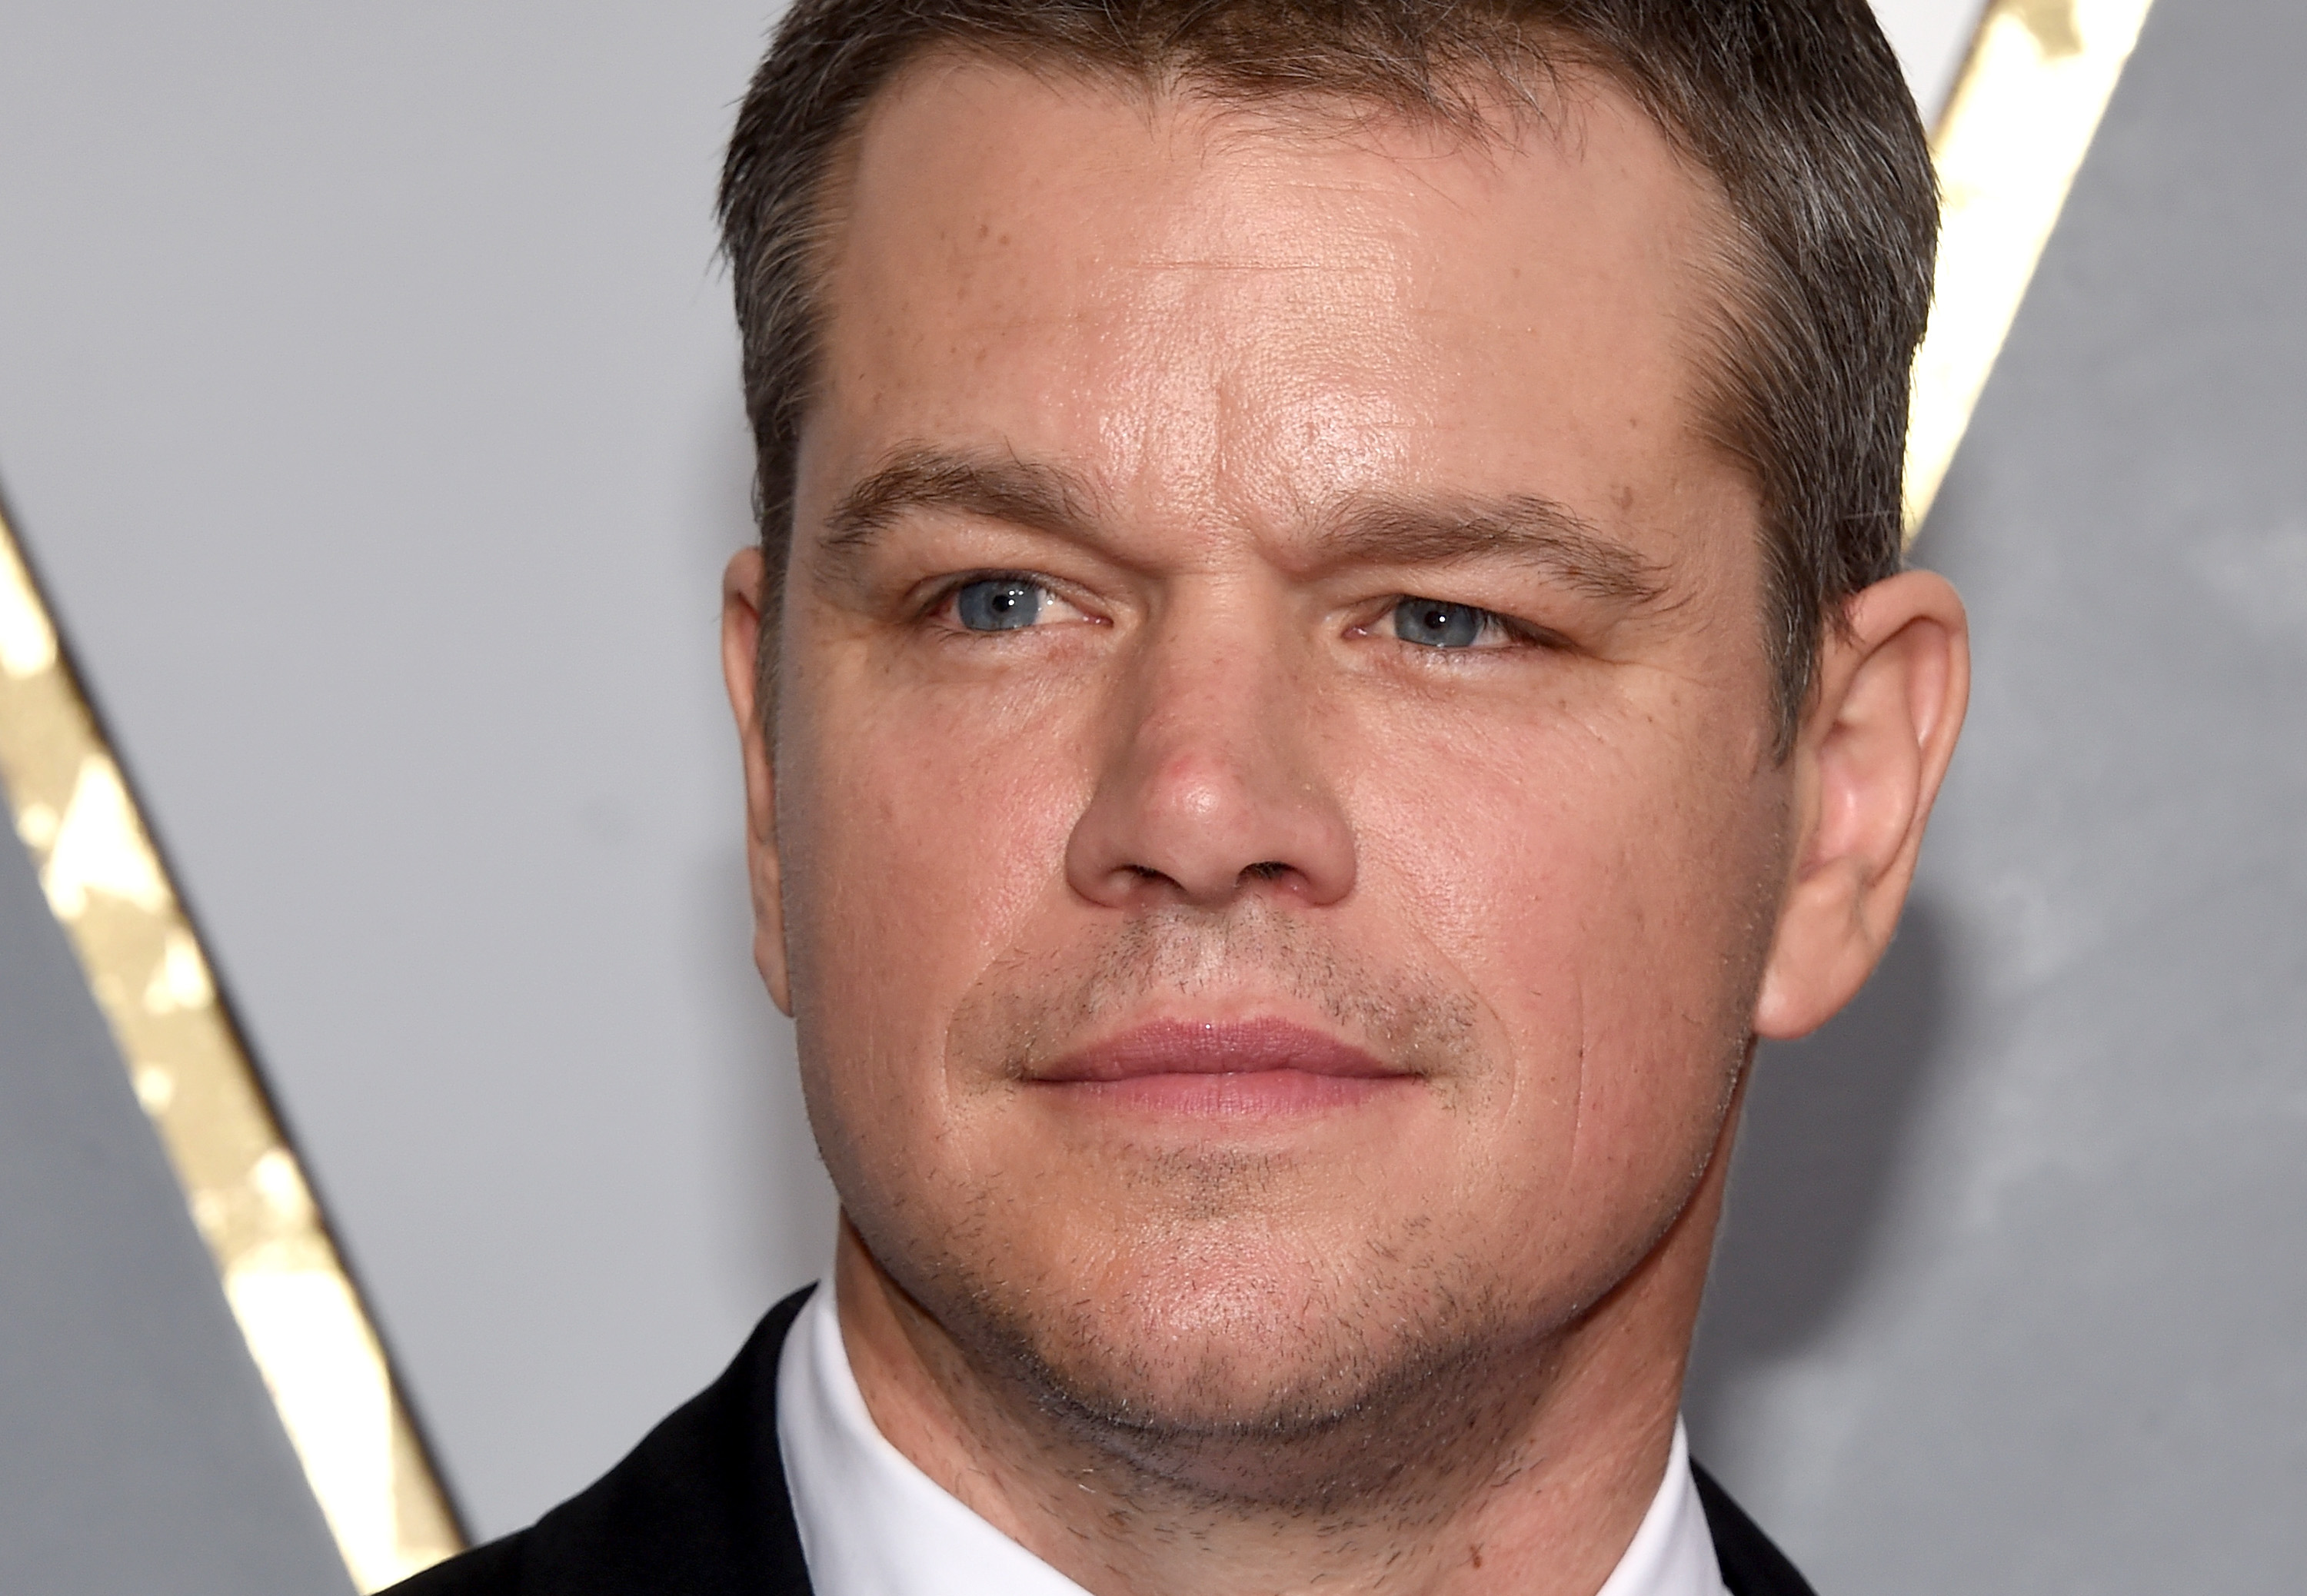 Matt Damon attends the 88th Annual Academy Awards at Hollywood &amp; Highland Center on February 28, 2016 in Hollywood, California.